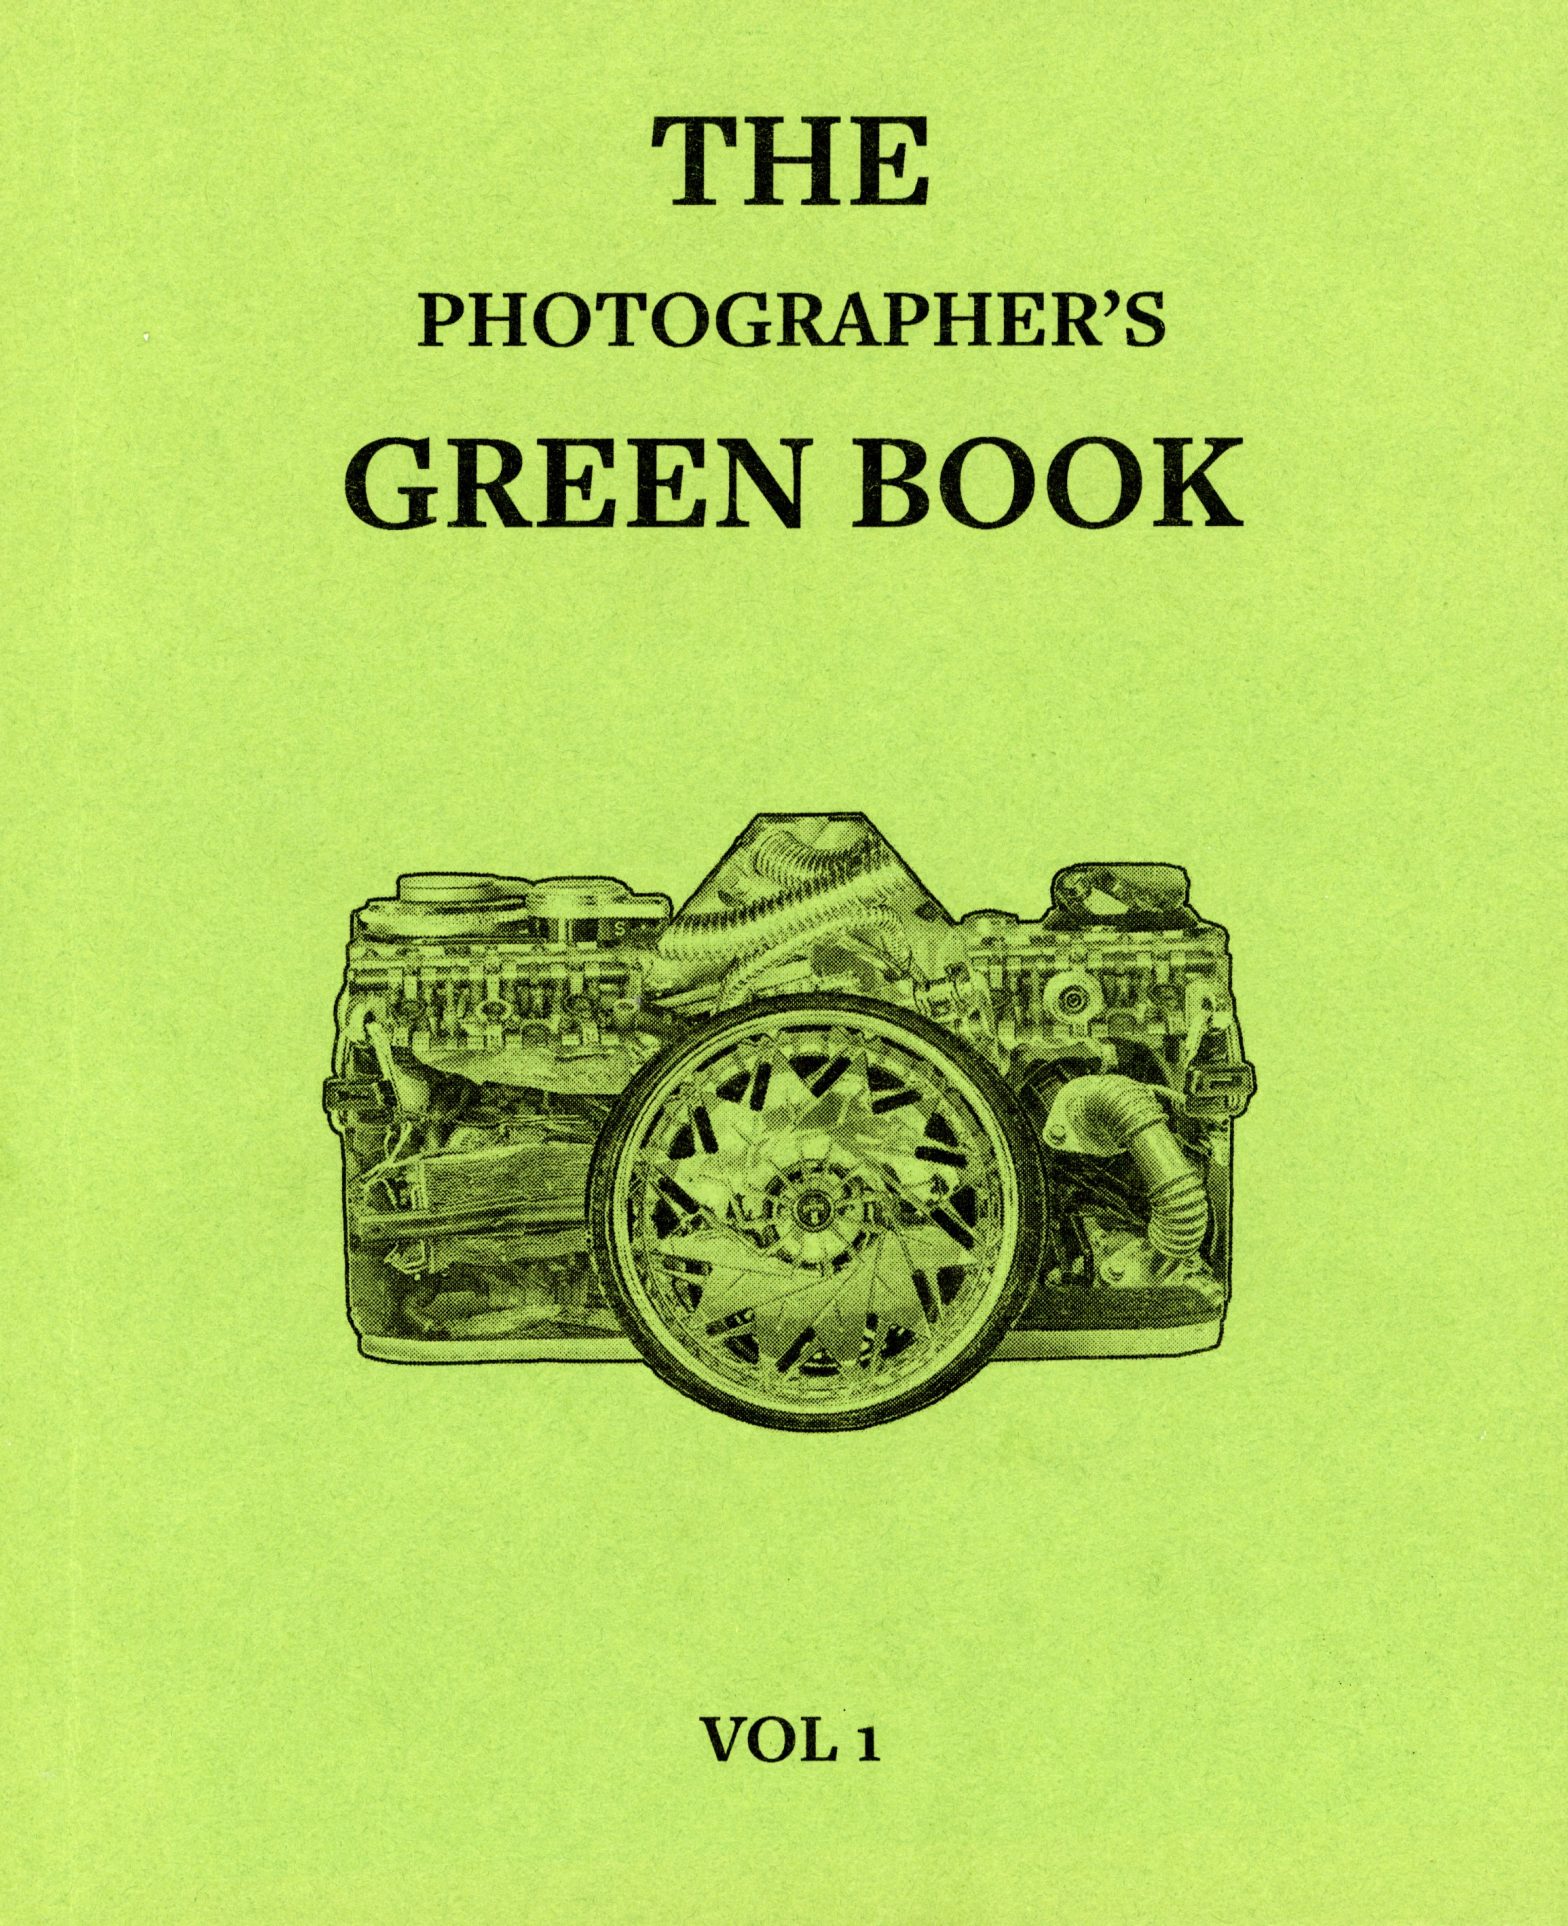 The Photographer’s Green Book Vol. 1